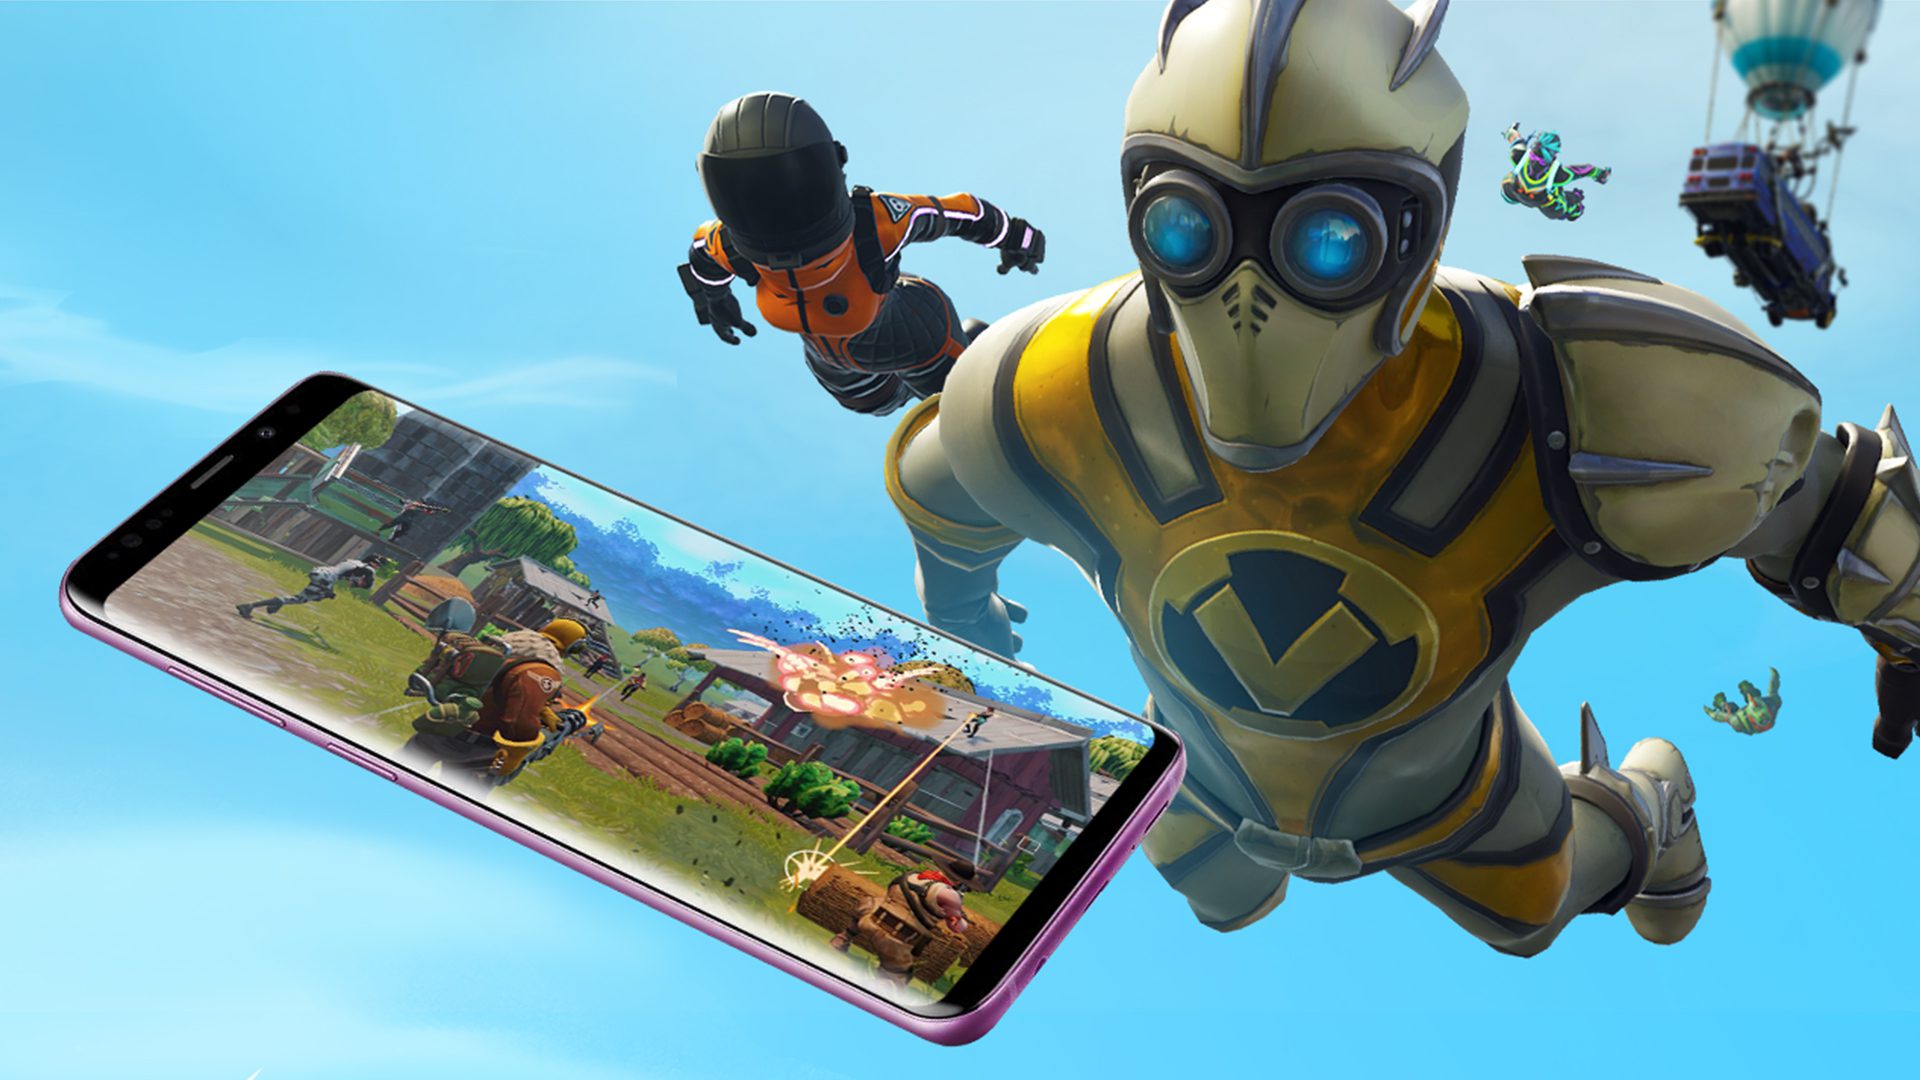 Fortnite Beta launches on Android this week